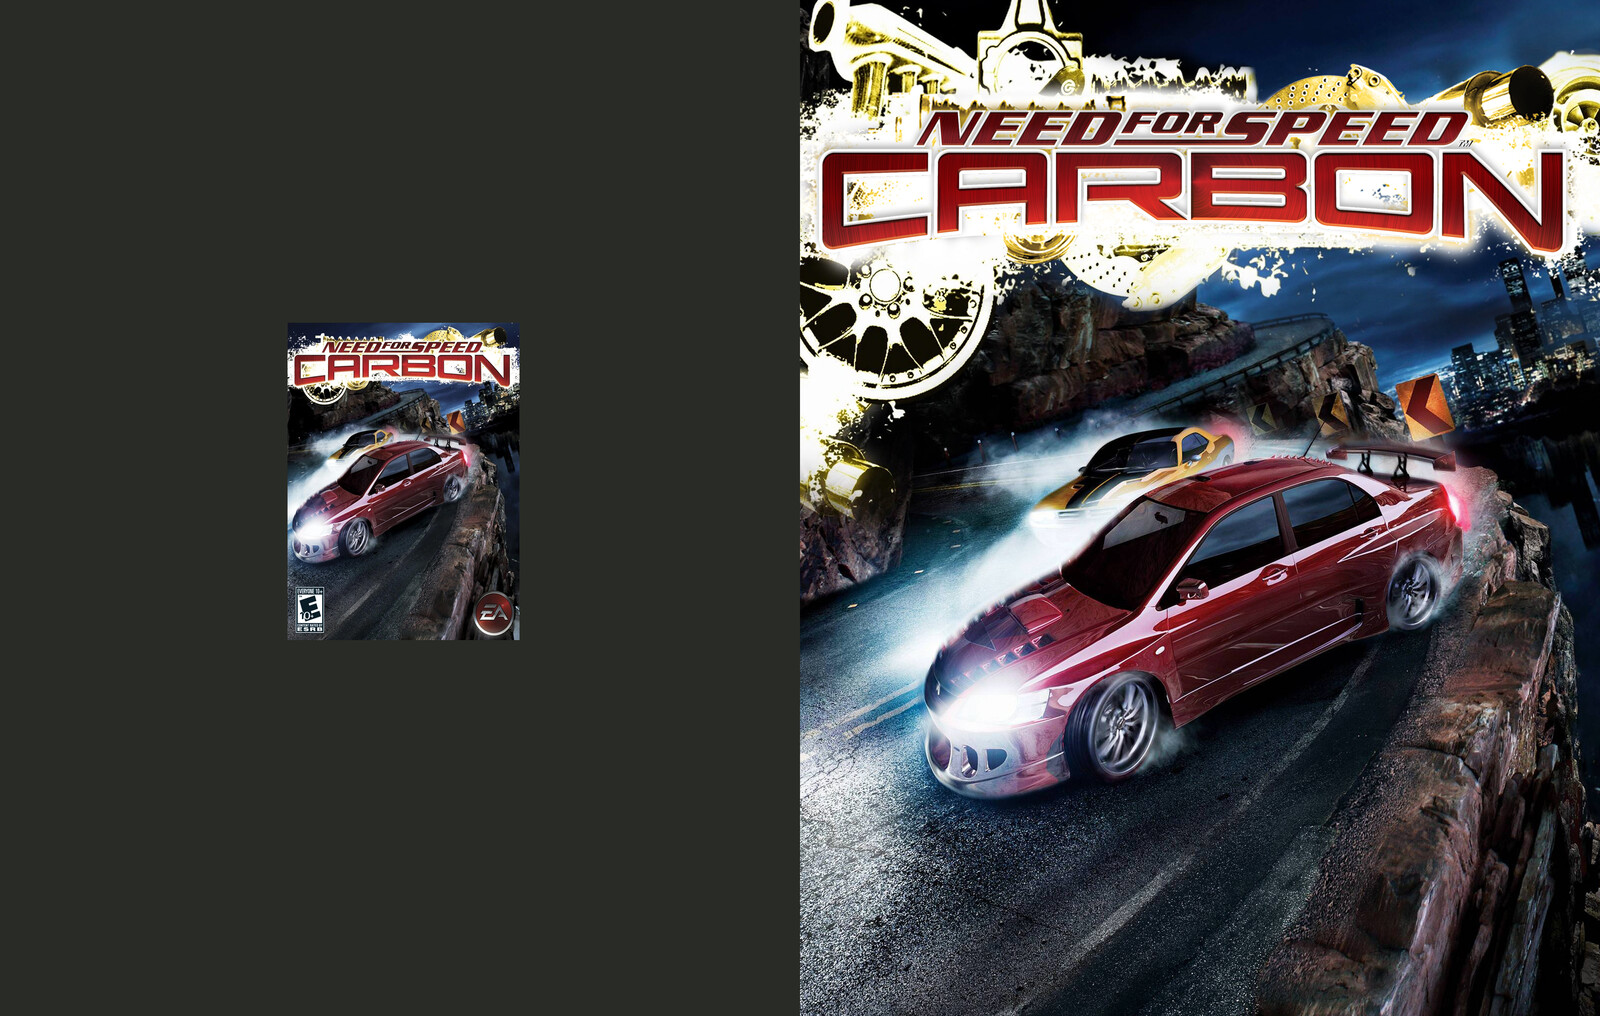 Need for Speed: Carbon (Original Scan vs. Poster format)